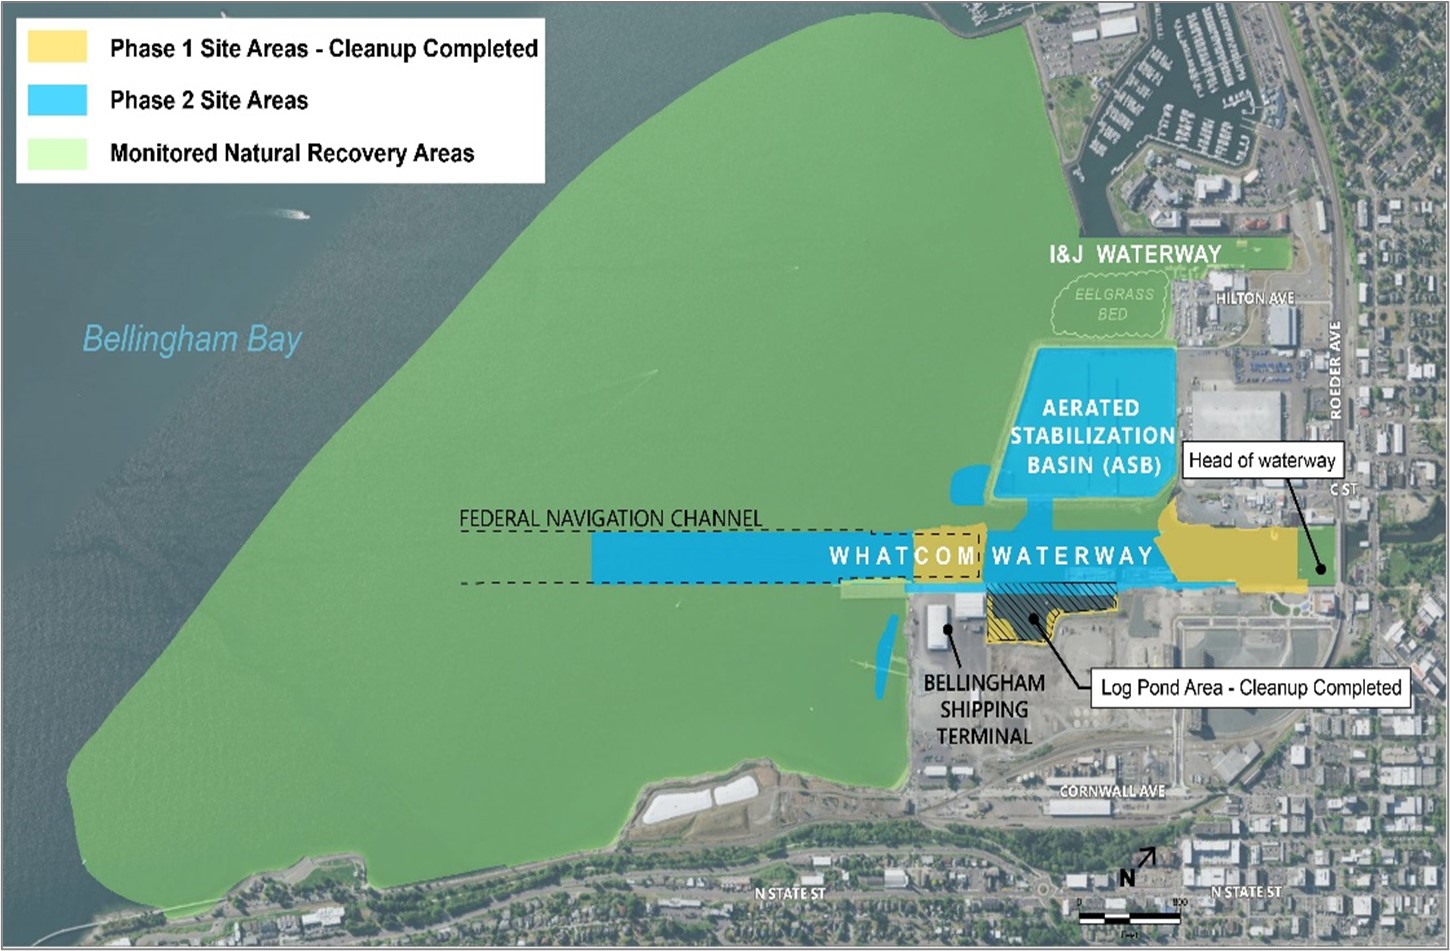 Map of Whatcom Waterway cleanup site showing Phase 1 and Phase 2 Site Areas as well as the monitored natural recovery areas.